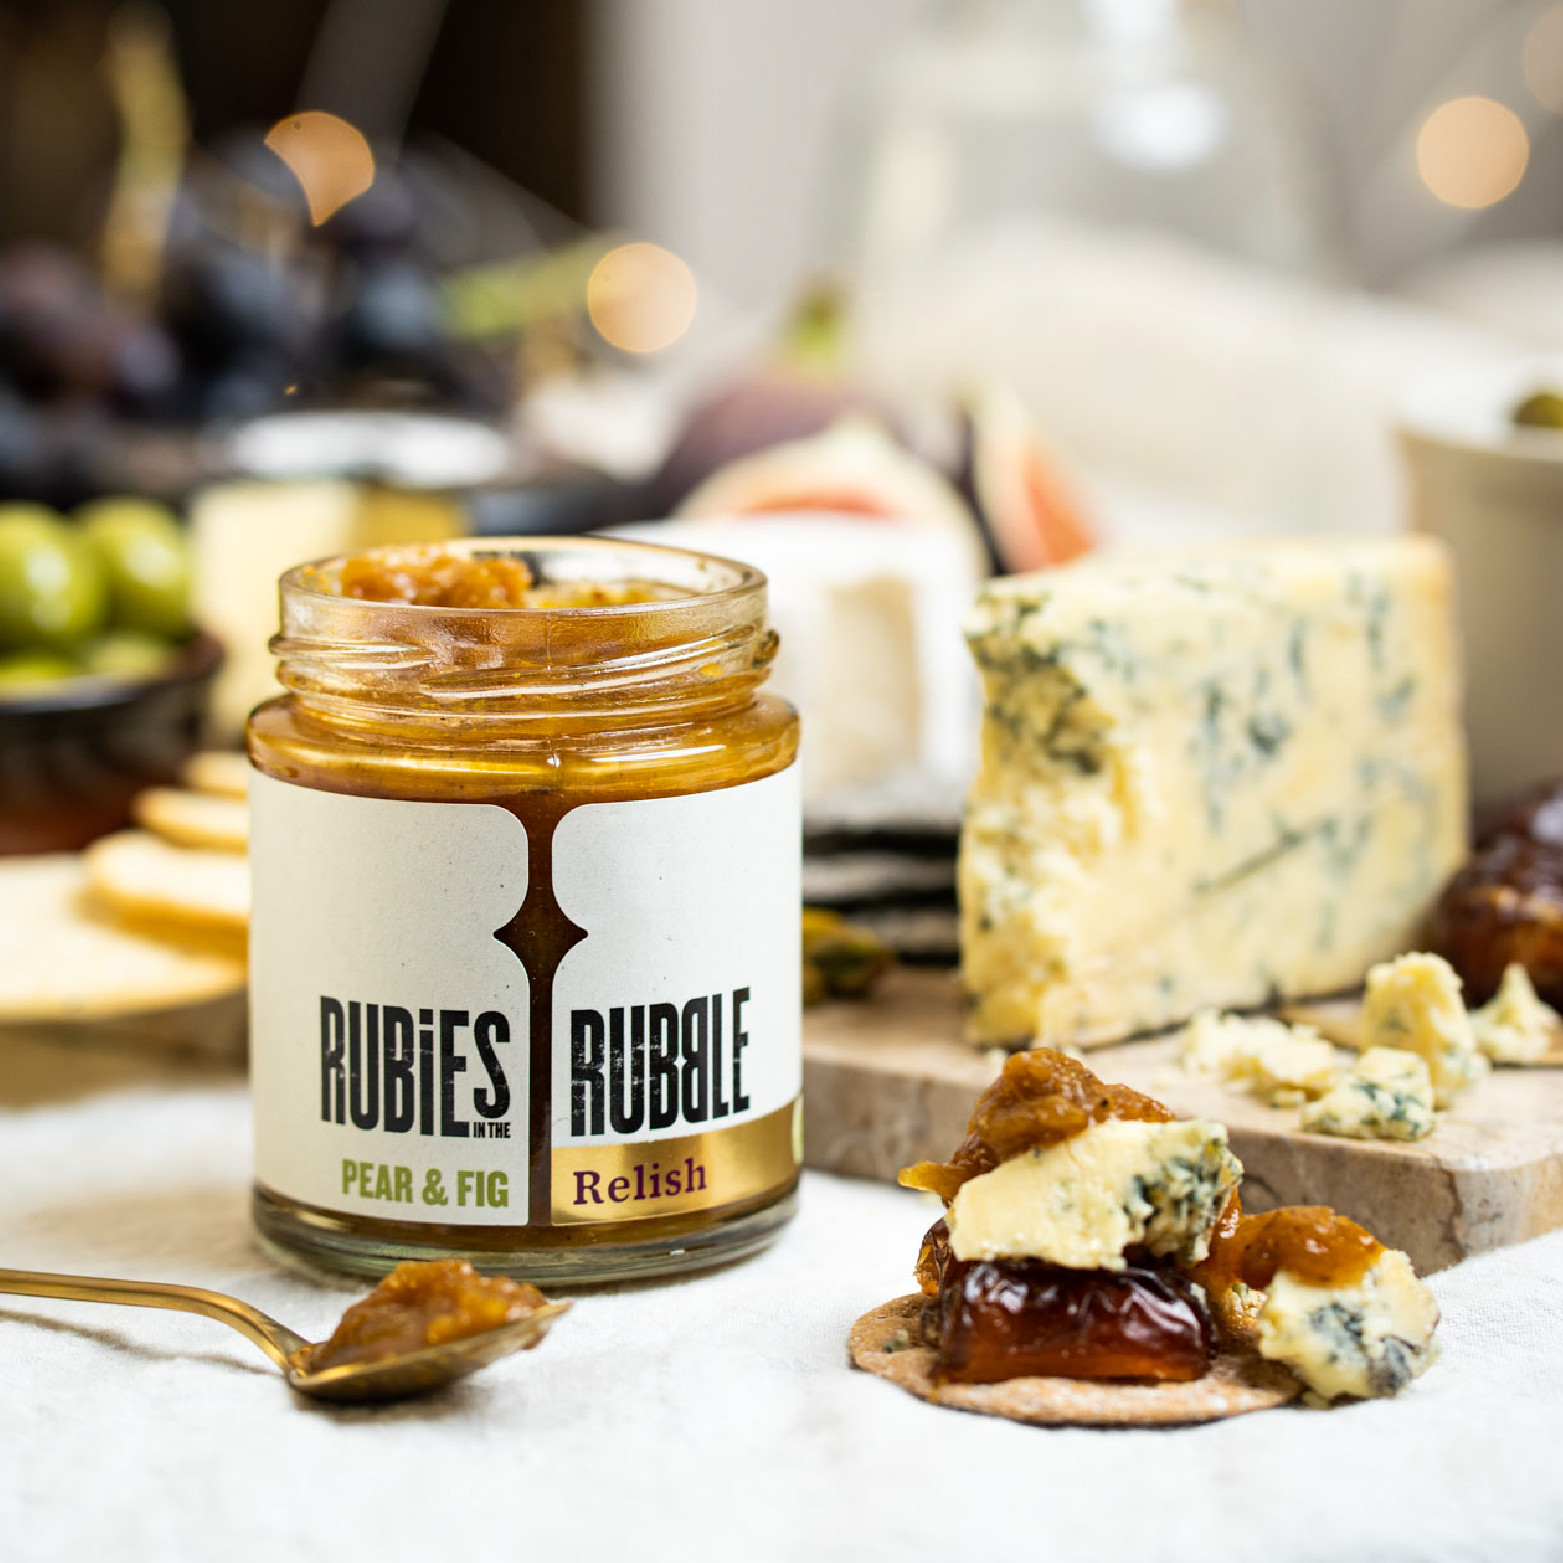 Rubies in the Rubble - Pear and Fig Chutney (210g)